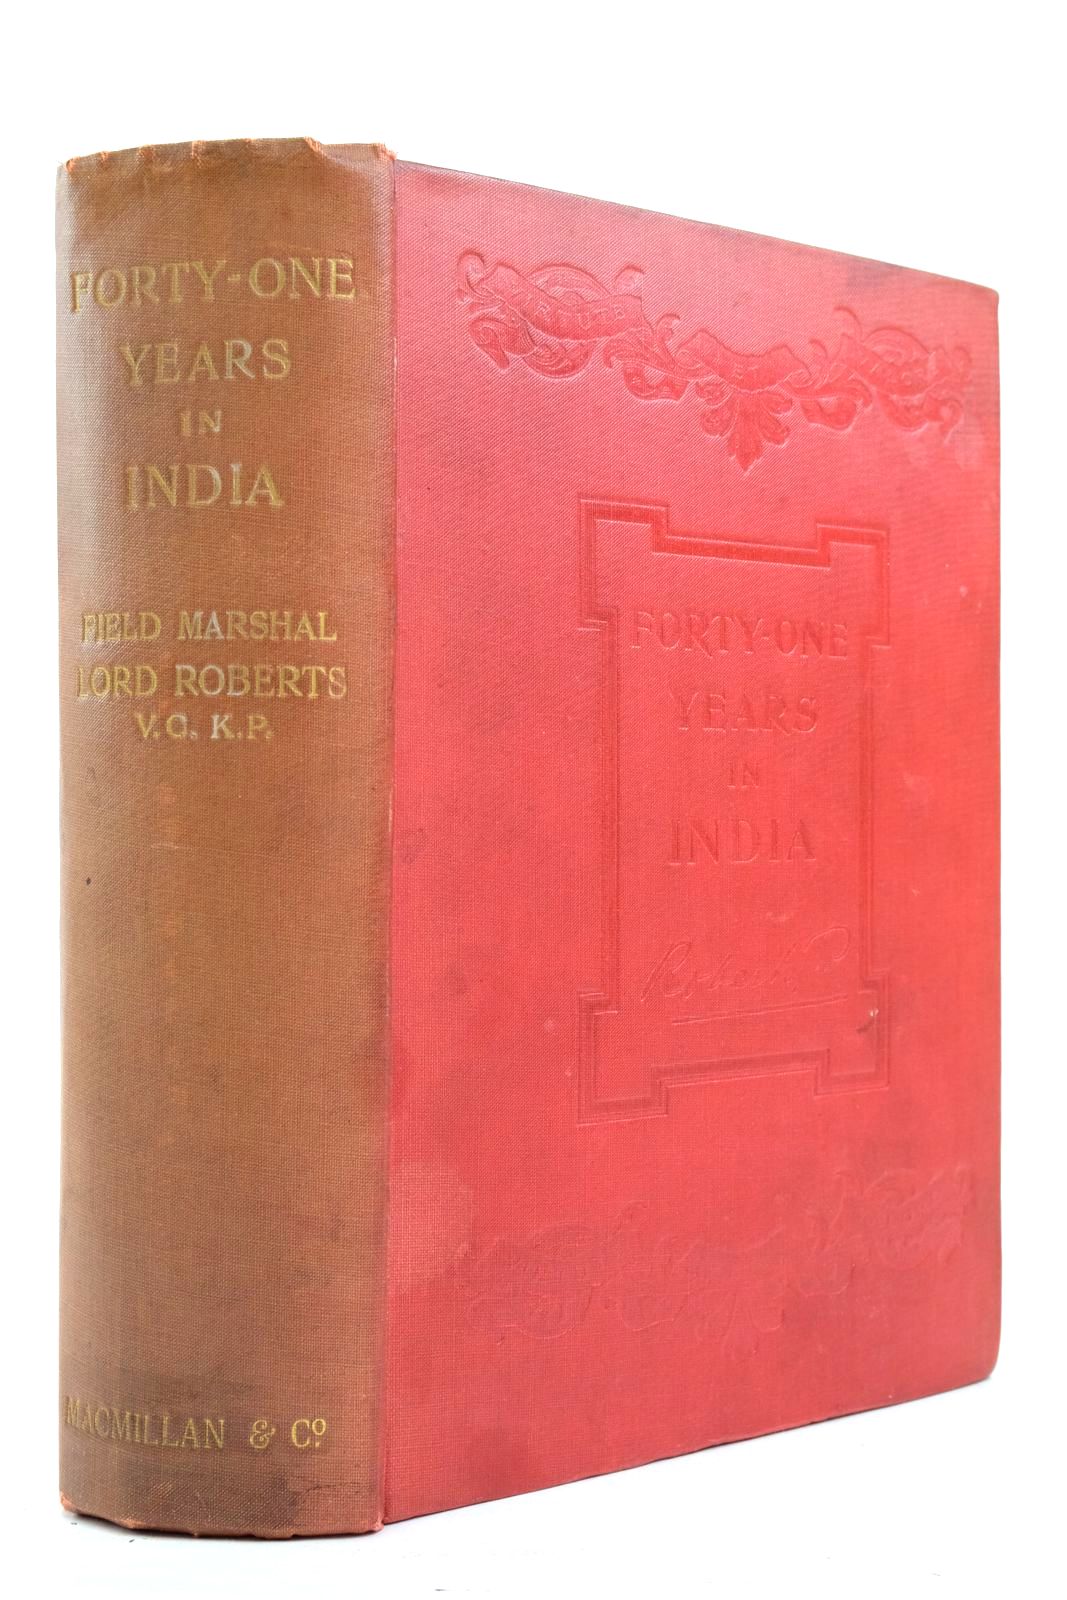 Photo of FORTY-ONE YEARS IN INDIA- Stock Number: 2137550